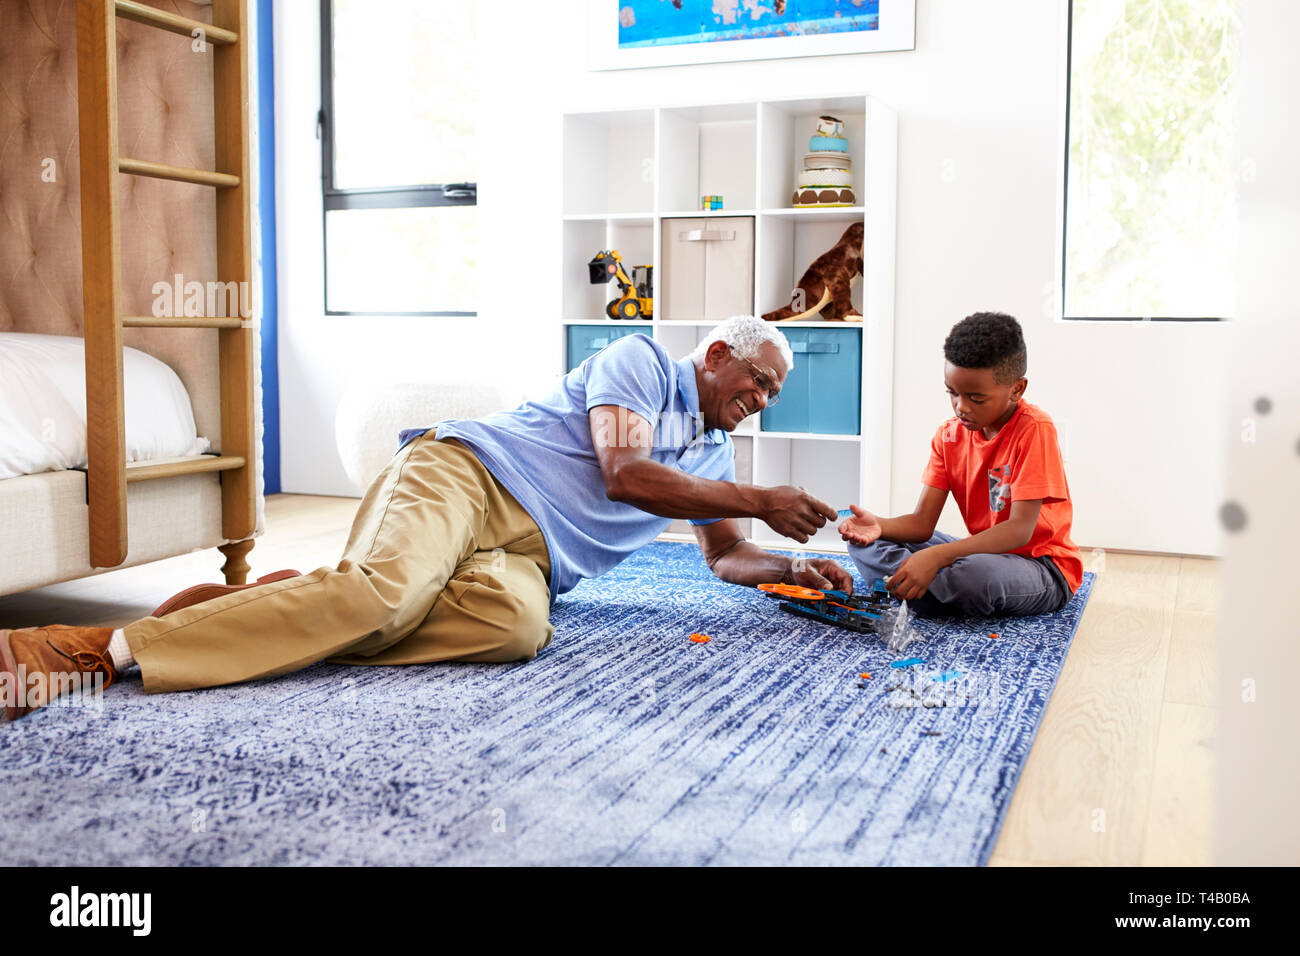 Grandfather With Grandson Lying On Rug At Home Building Robotic Model Together Stock Photo